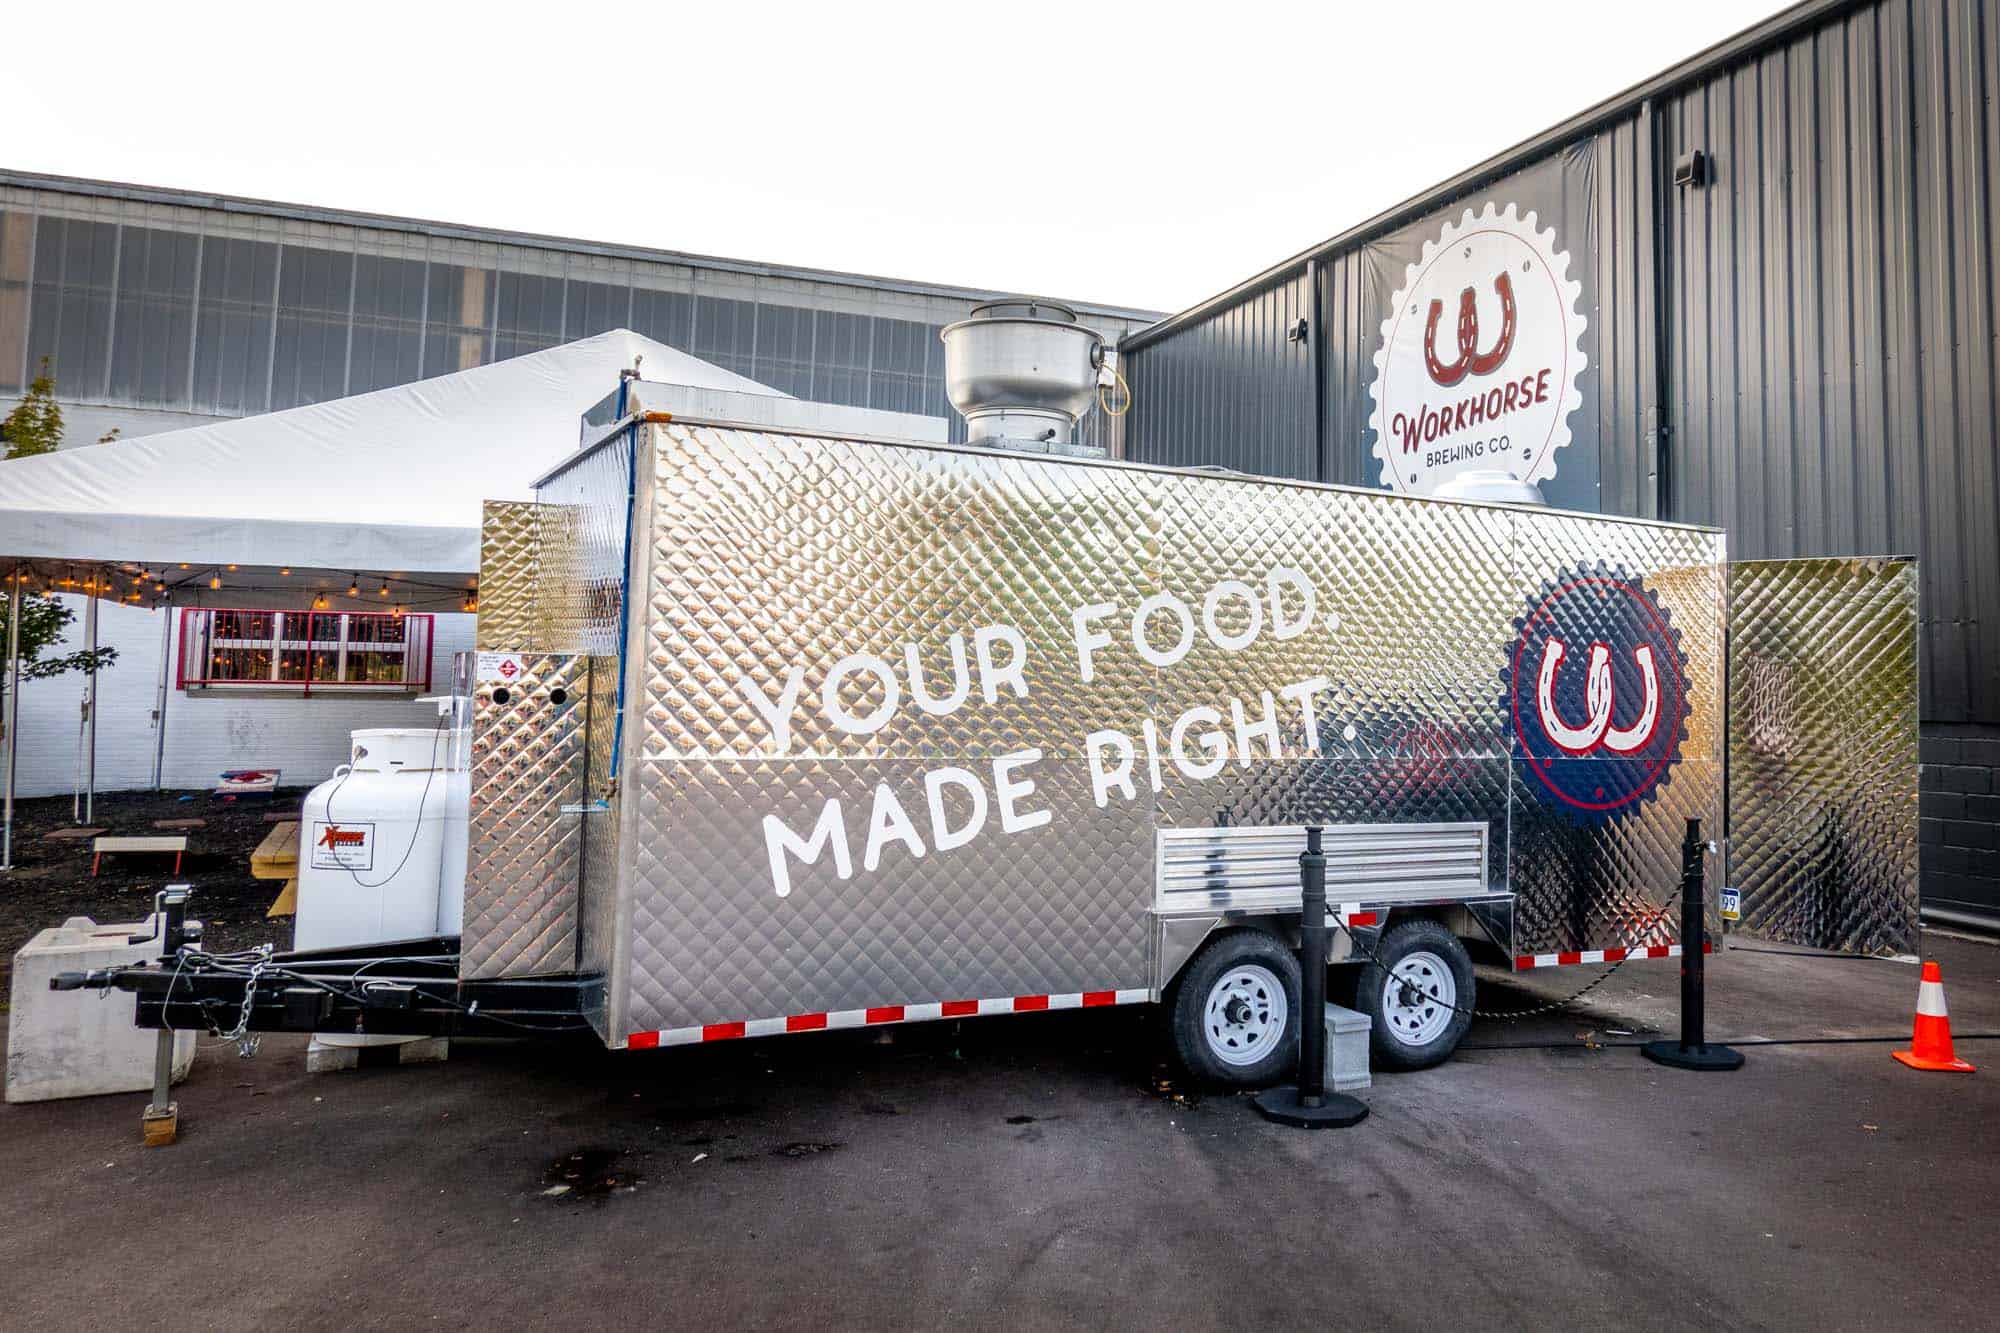 Food truck saying "Your Food. Made Right" in front of Workhouse sign